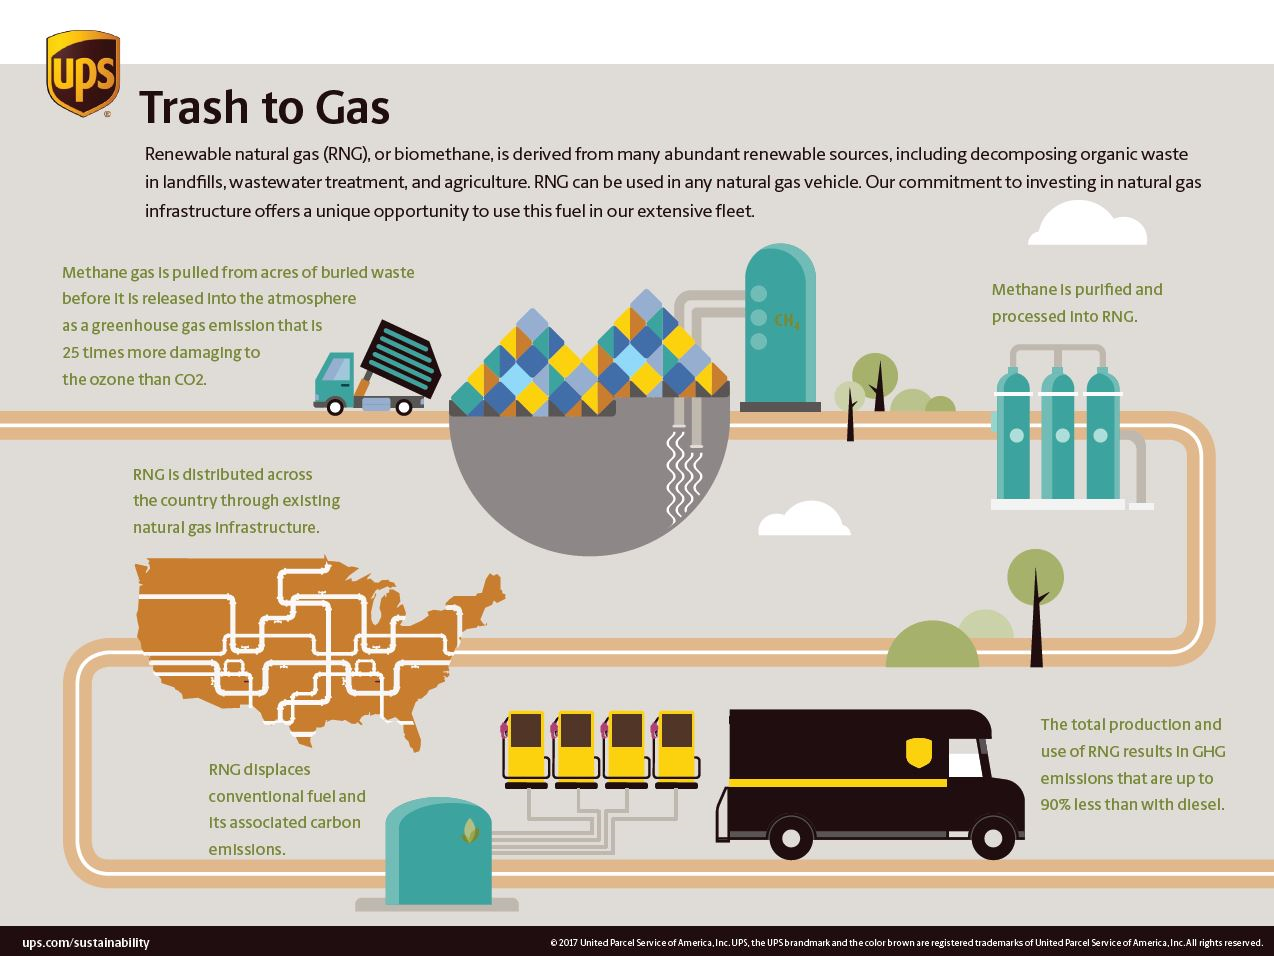 UPS steps on the renewable gas Post & Parcel